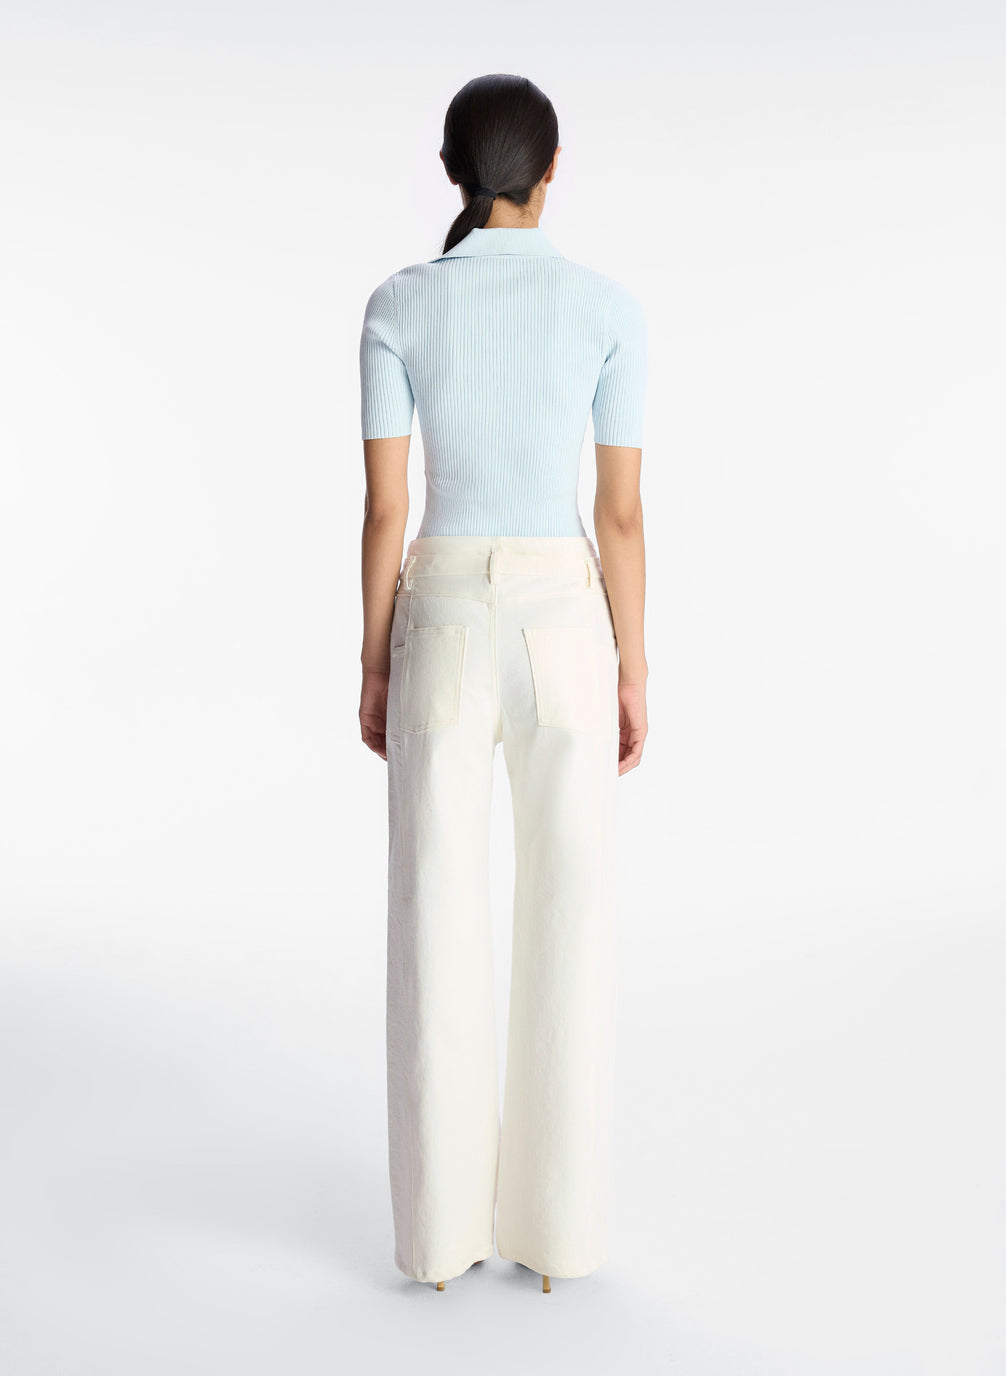 back view of woman wearing light blue short sleeve knit collared top and white denim pants